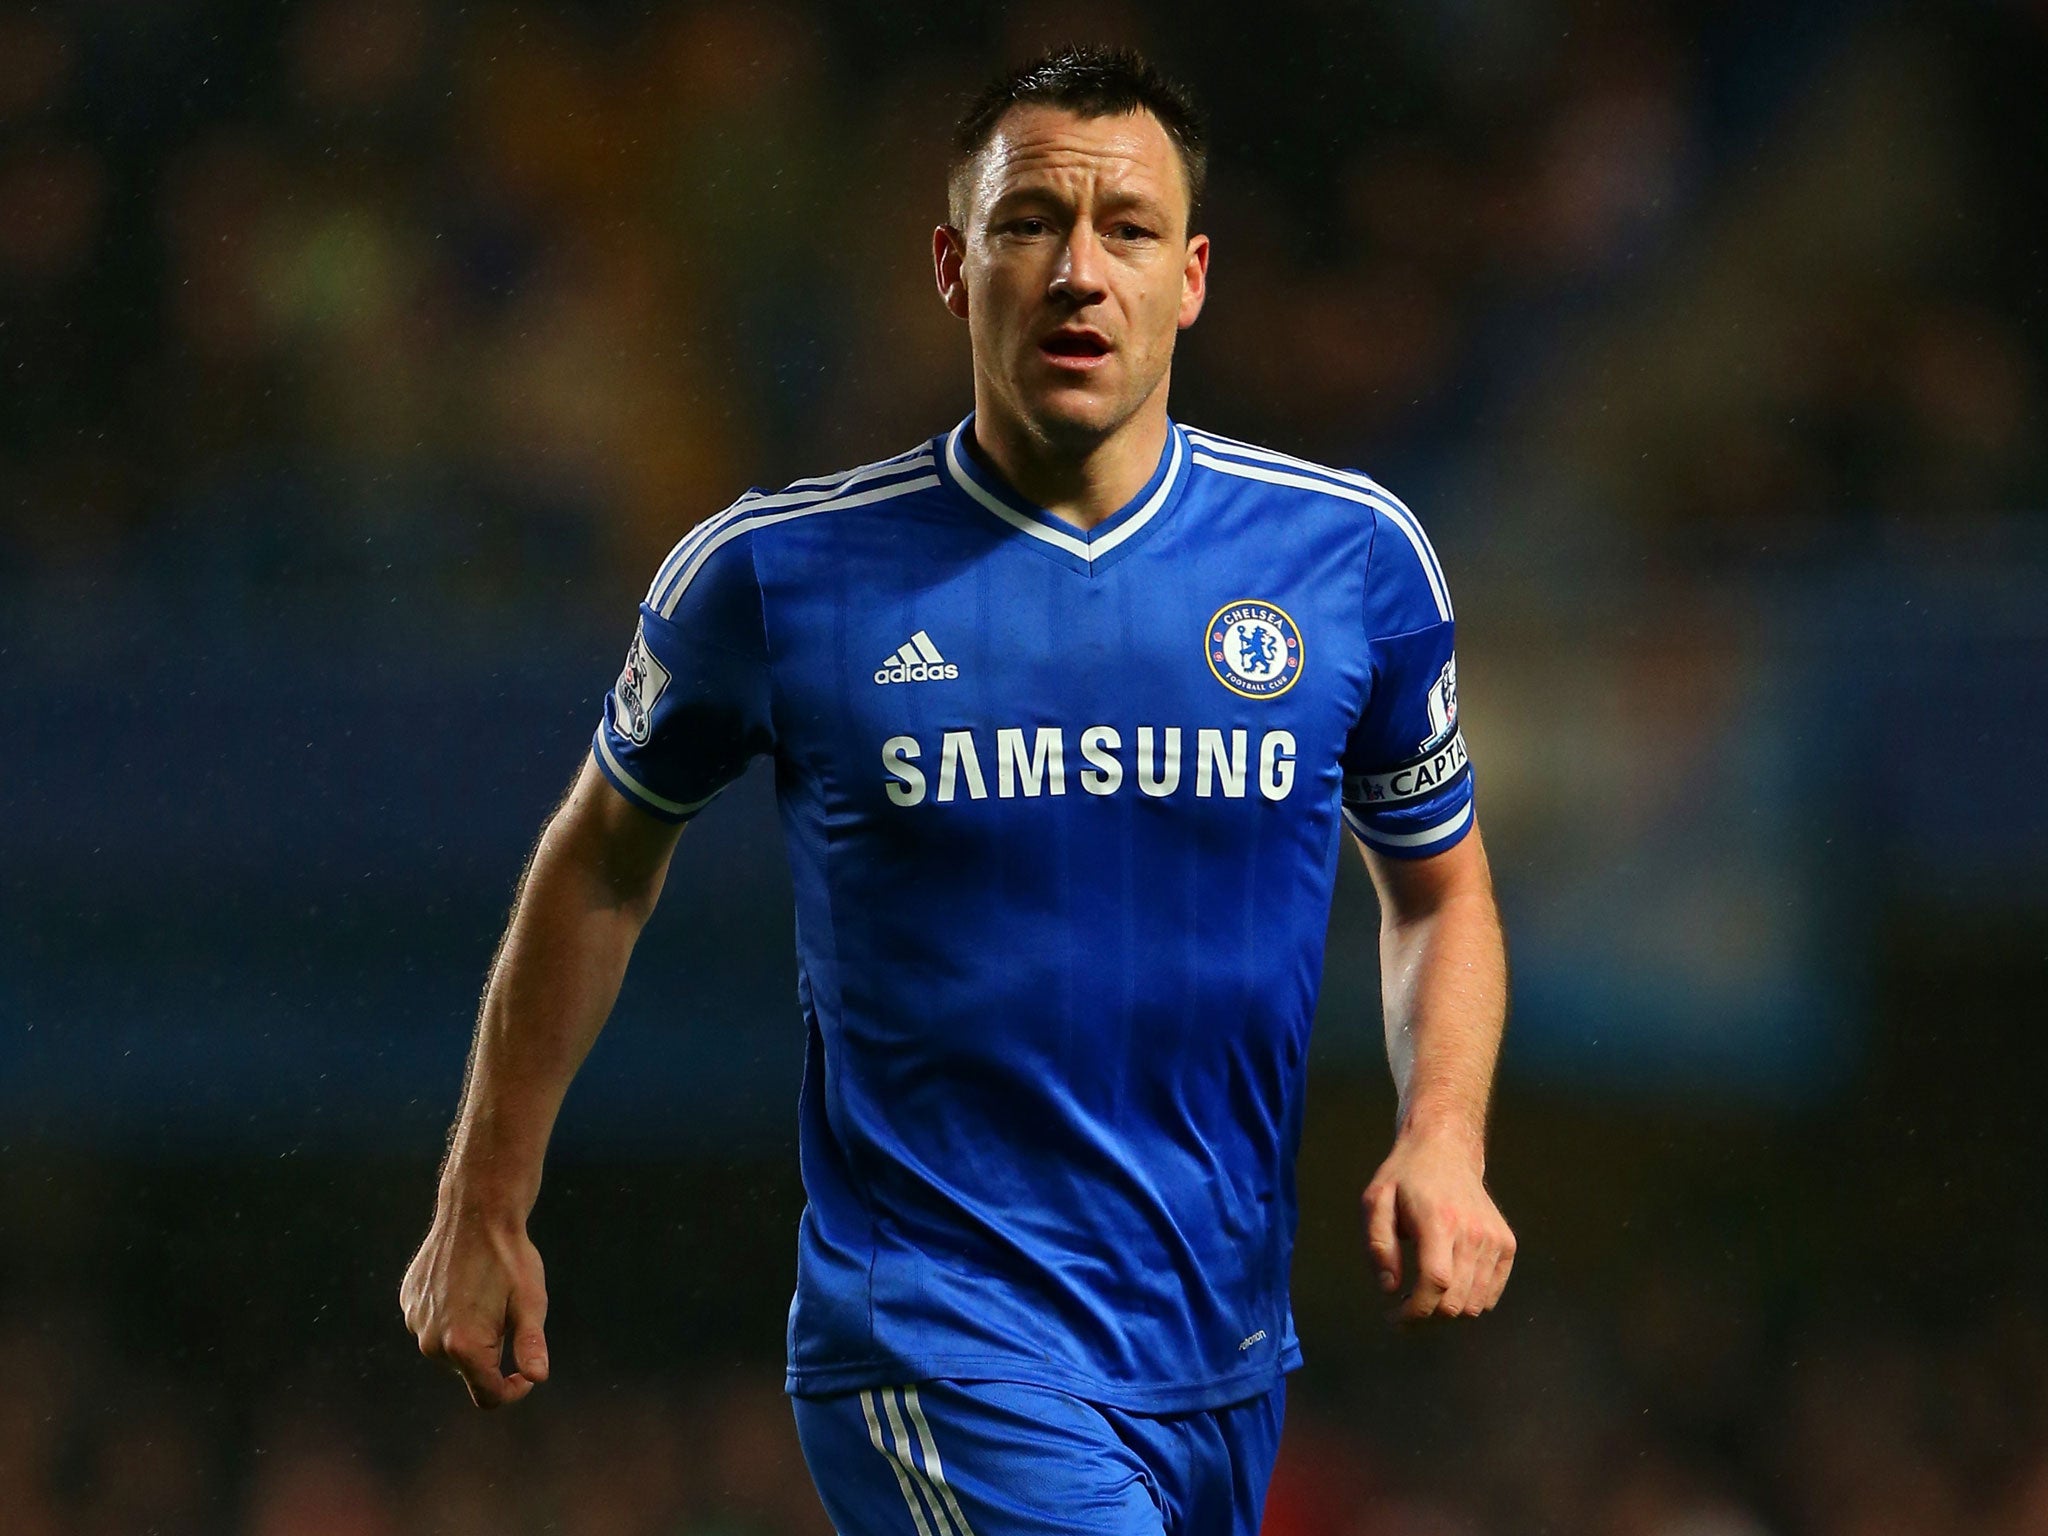 At the age of 33, John Terry has played every minute of every Chelsea league game this season